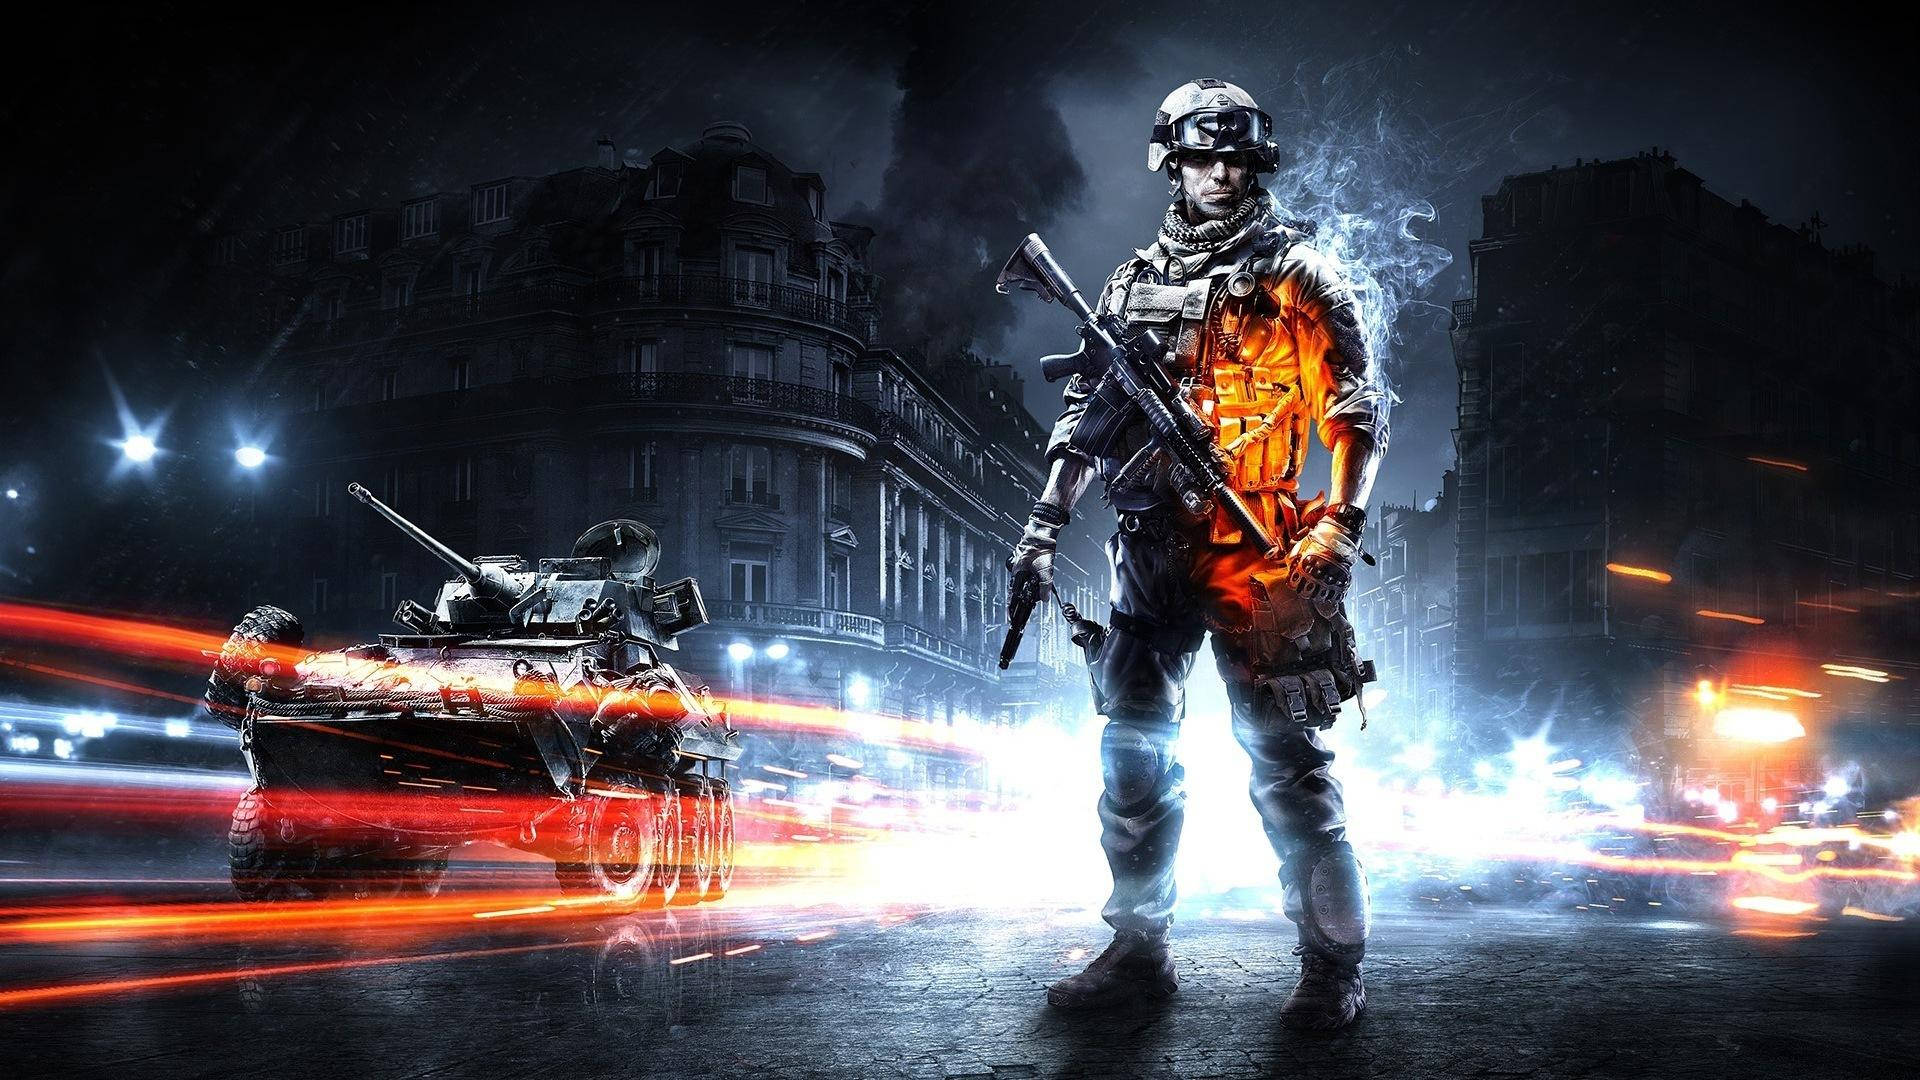 Battlefield 3 Poster In Action